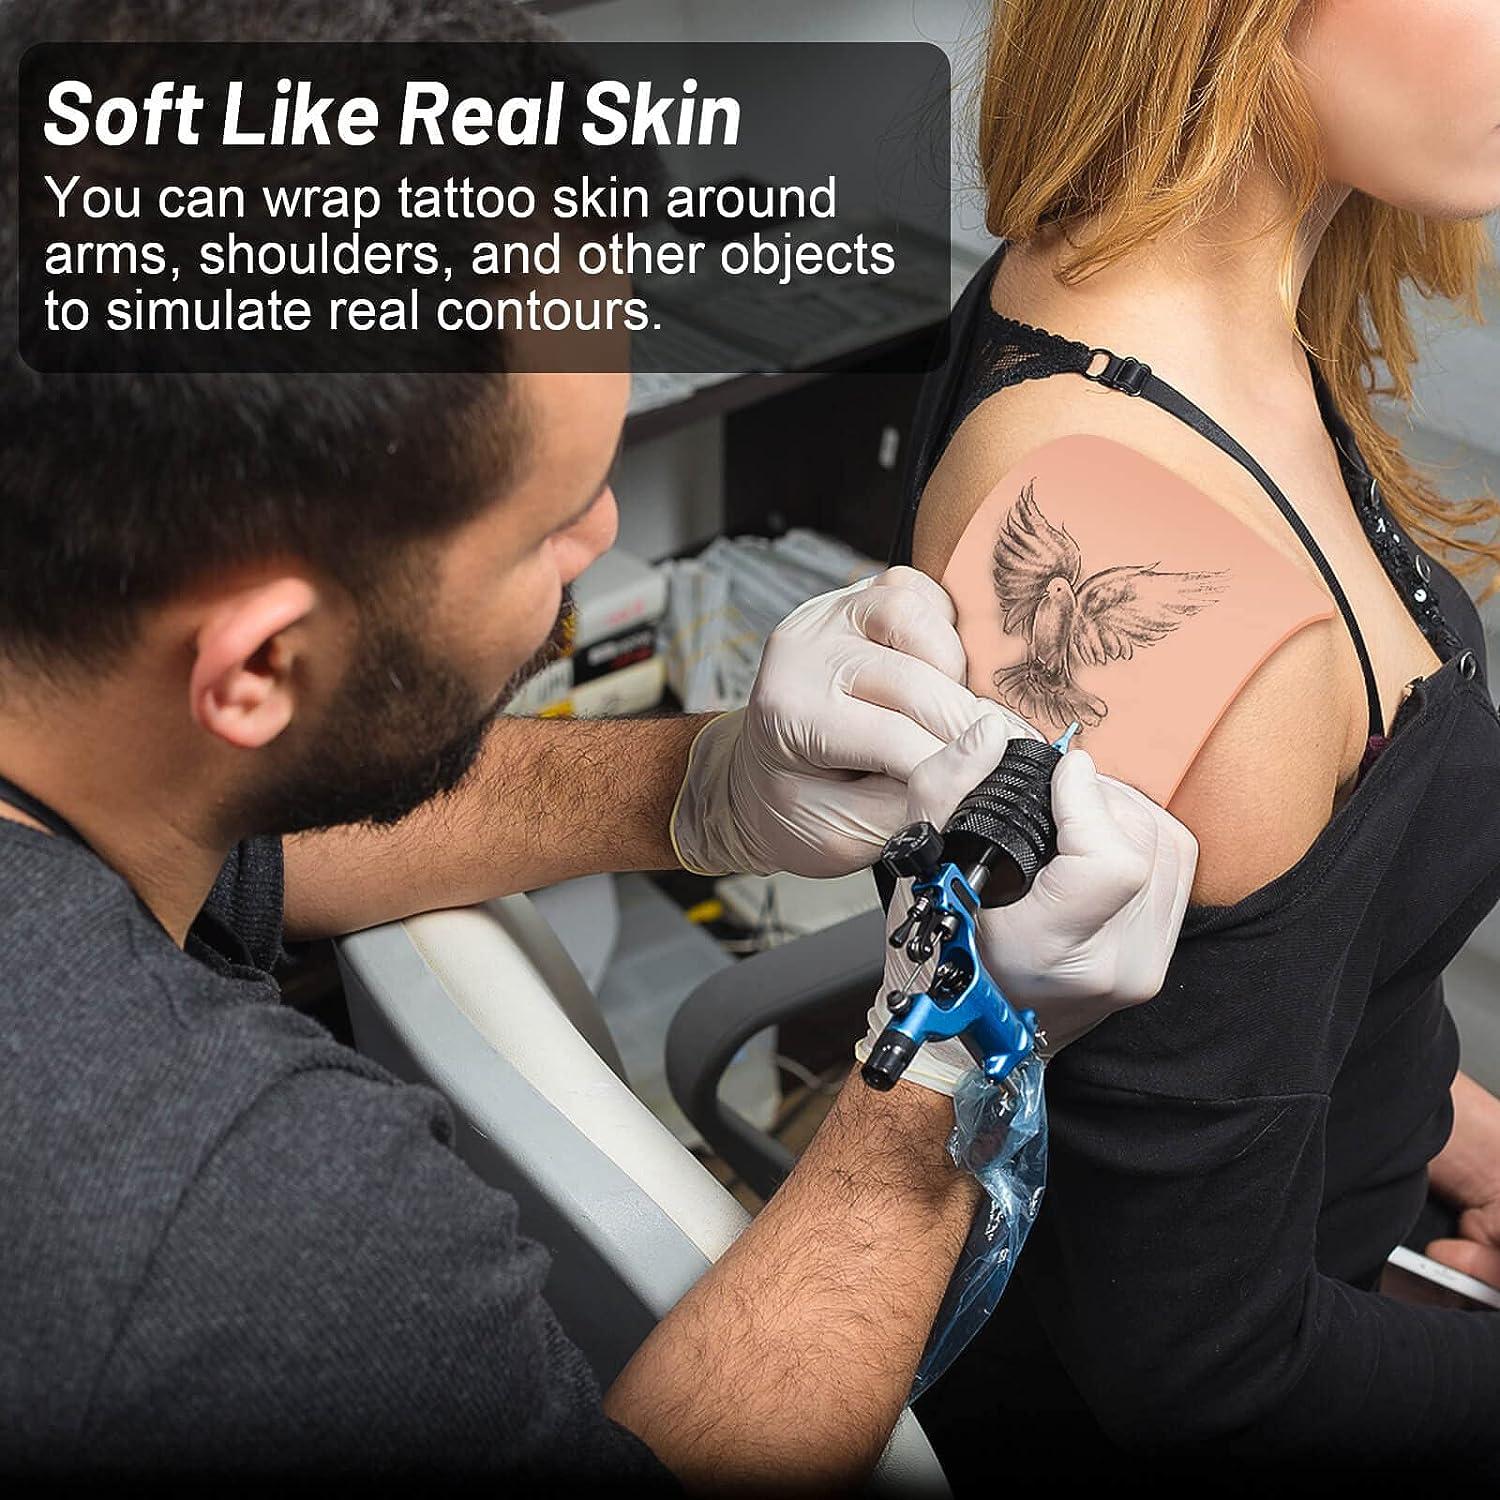 The Reasons You Should Try Out Tattoo Practice Skin